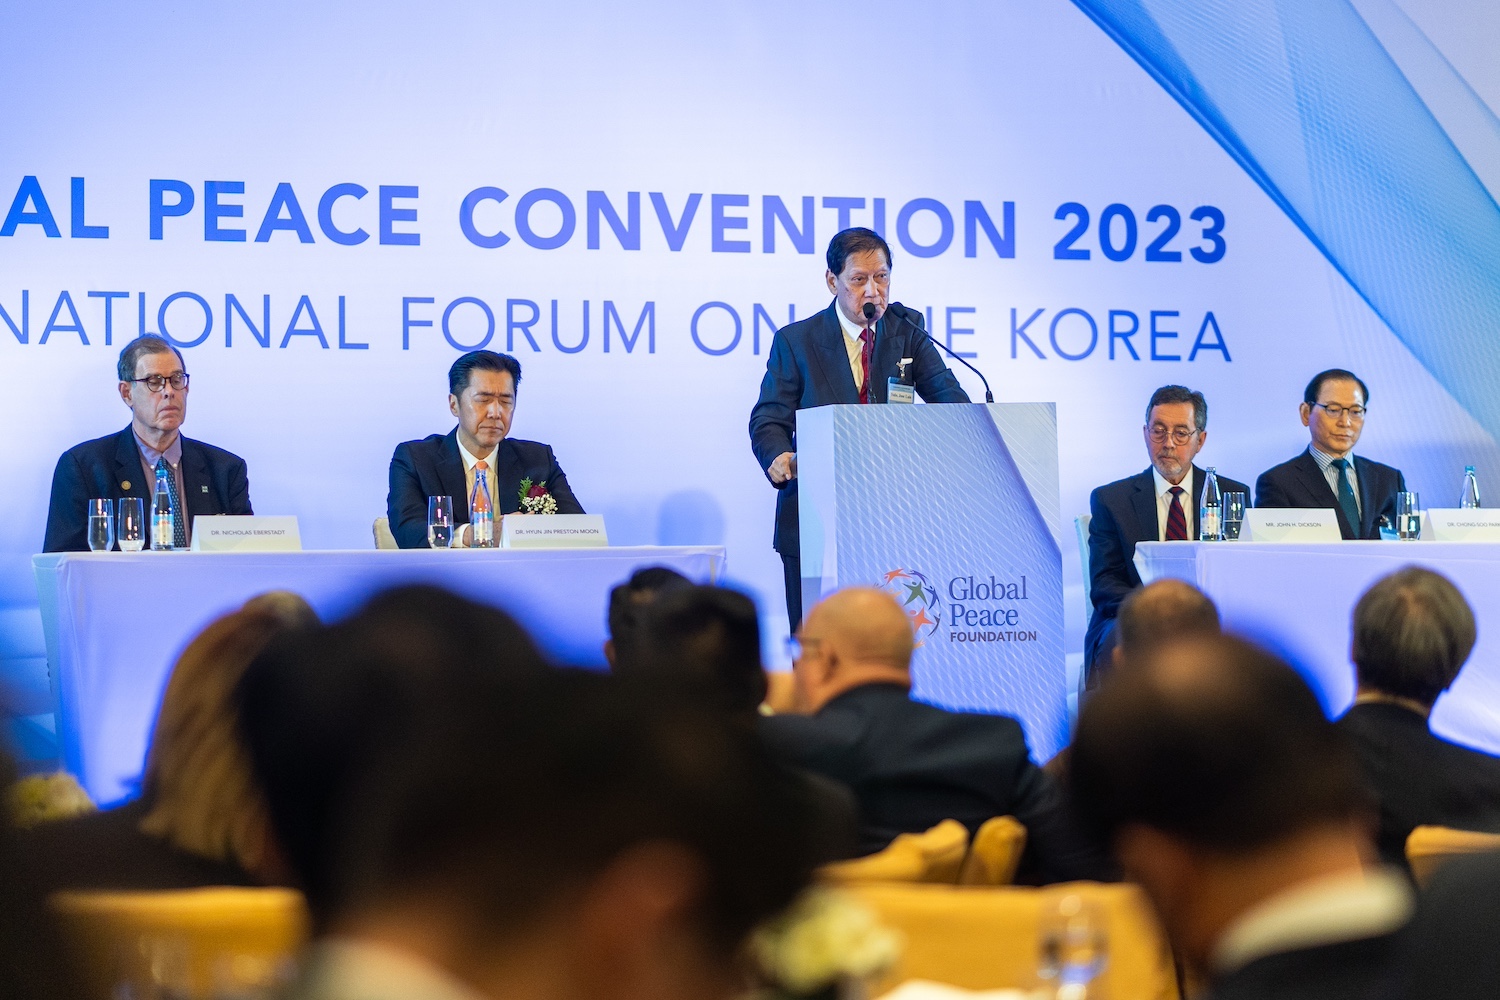 Mr. Jose Luis U. Yulo, Jr., President, Chamber of Commerce of the Philippines Islands, speaking during the International Forum on One Korea